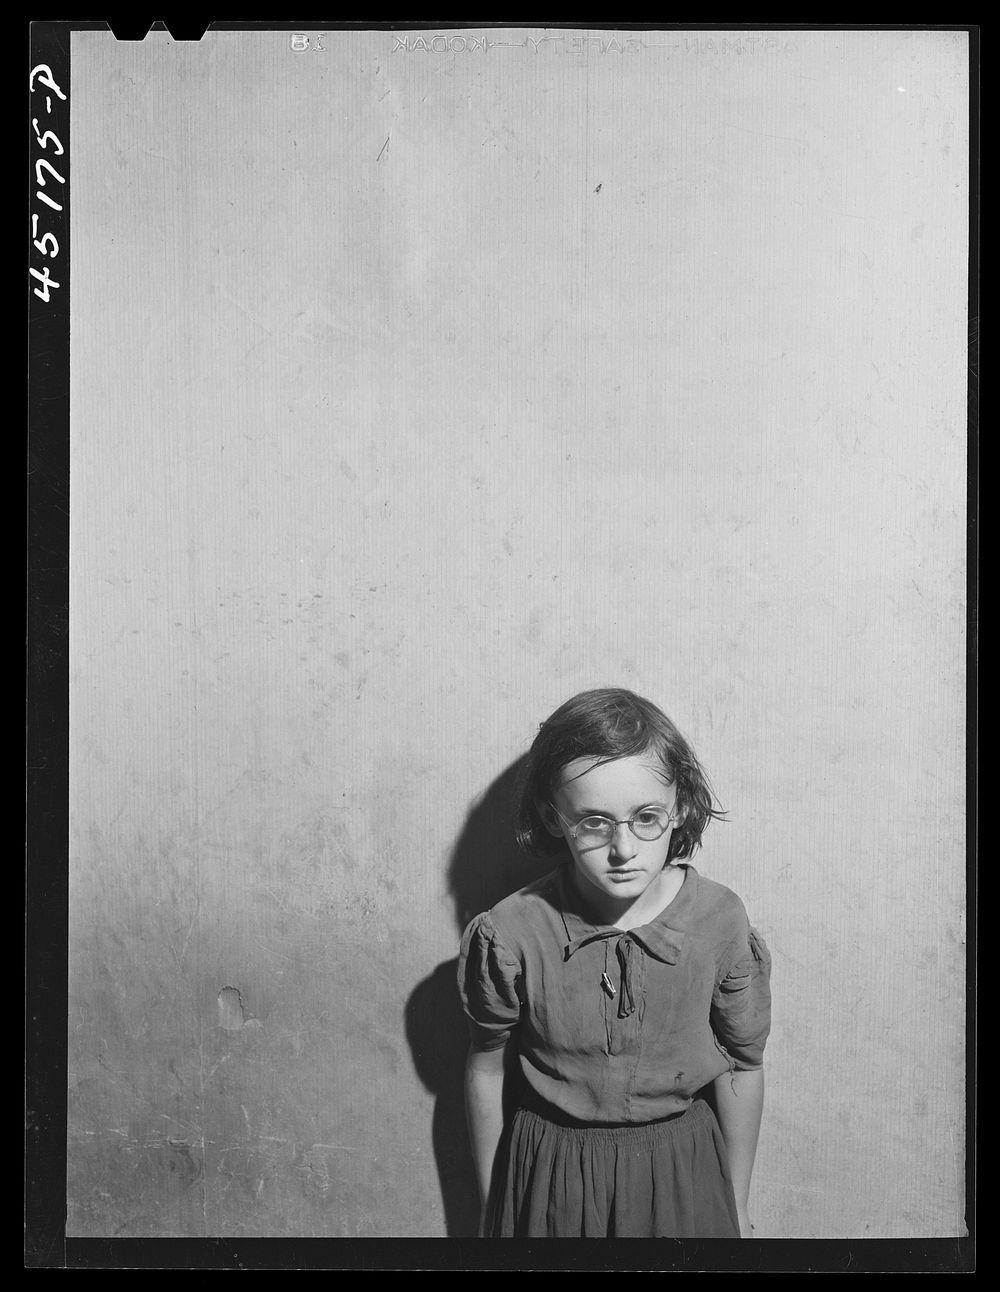 One of the children of Albert Lynch, FSA (Farm Security Administration) dairy farmer near Dummerston, Vermont. Sourced from…